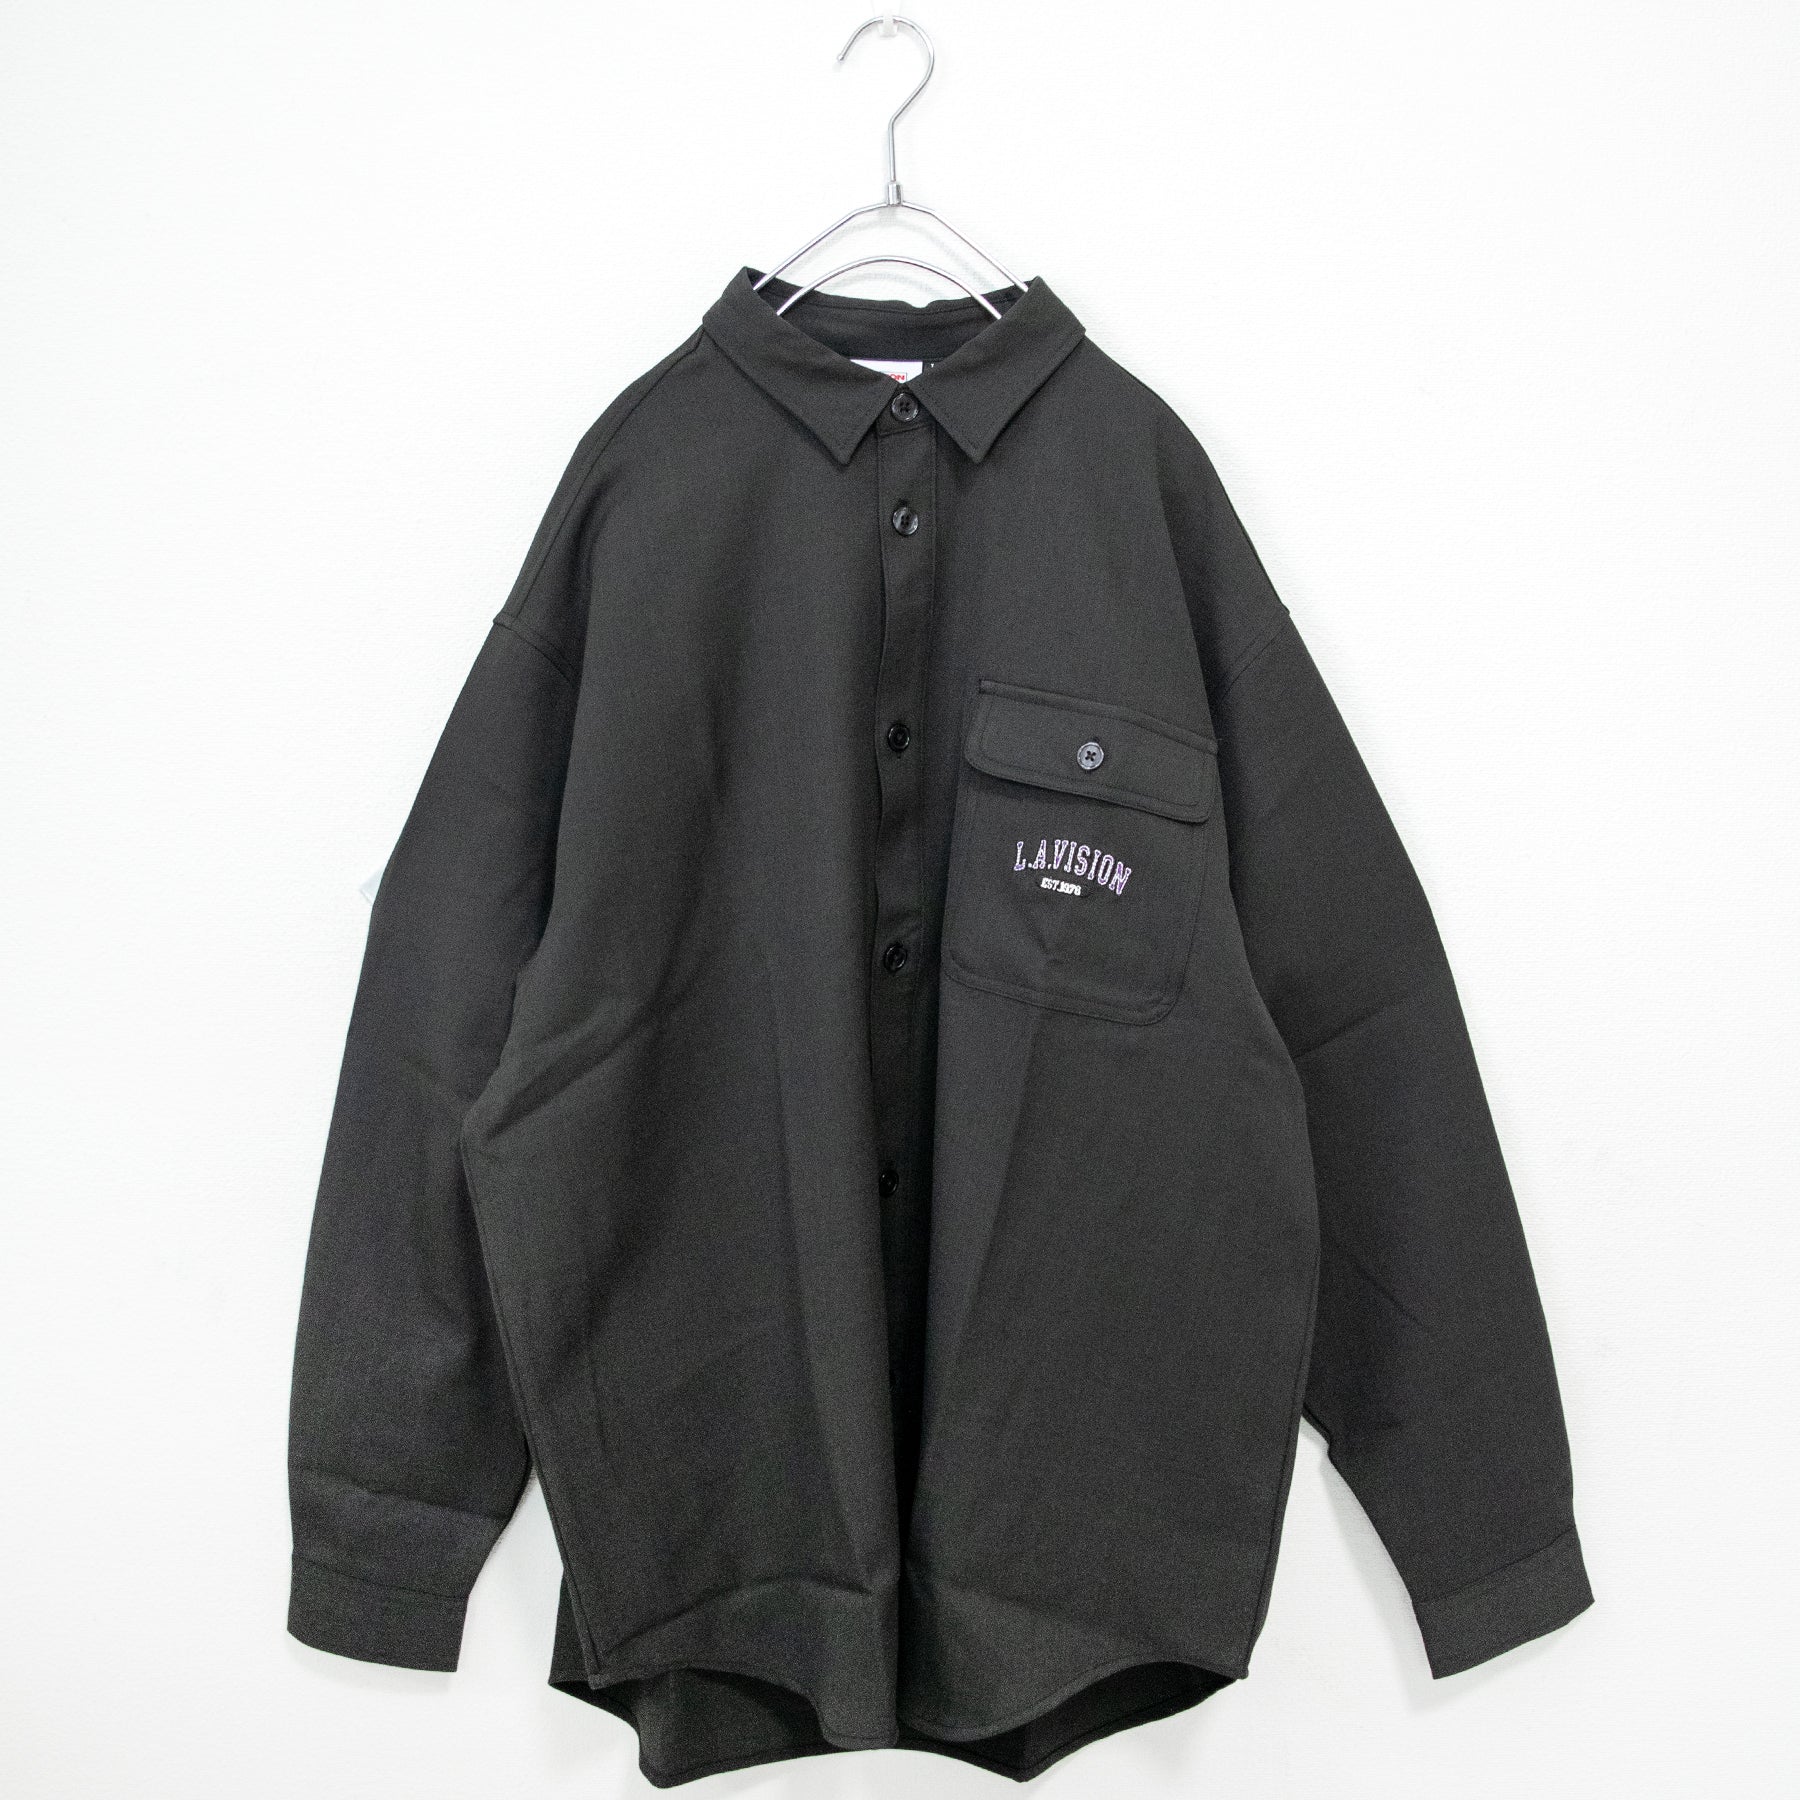 VISION STREET WEAR Circle Logo Embroidery Over Shirt - YOUAREMYPOISON